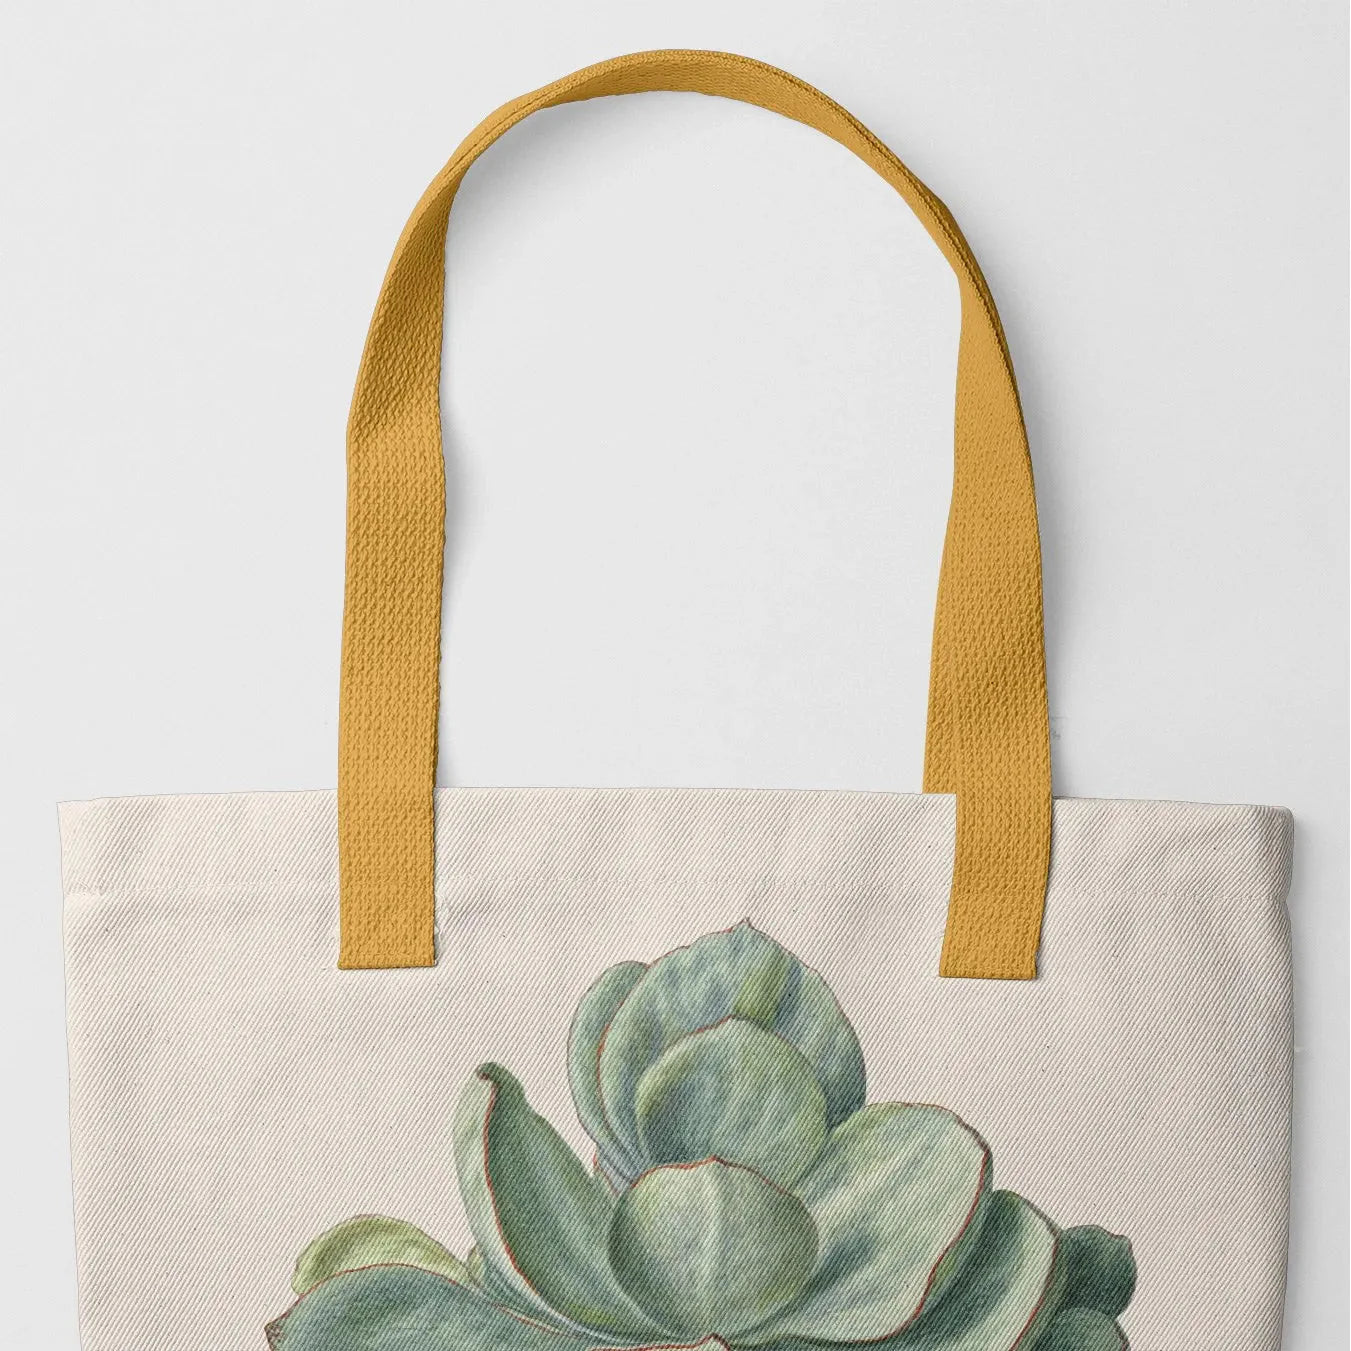 Little Green Man Tote - Desert Trail - Heavy Duty Reusable Grocery Bag - Yellow Handles - Shopping Totes - Aesthetic Art